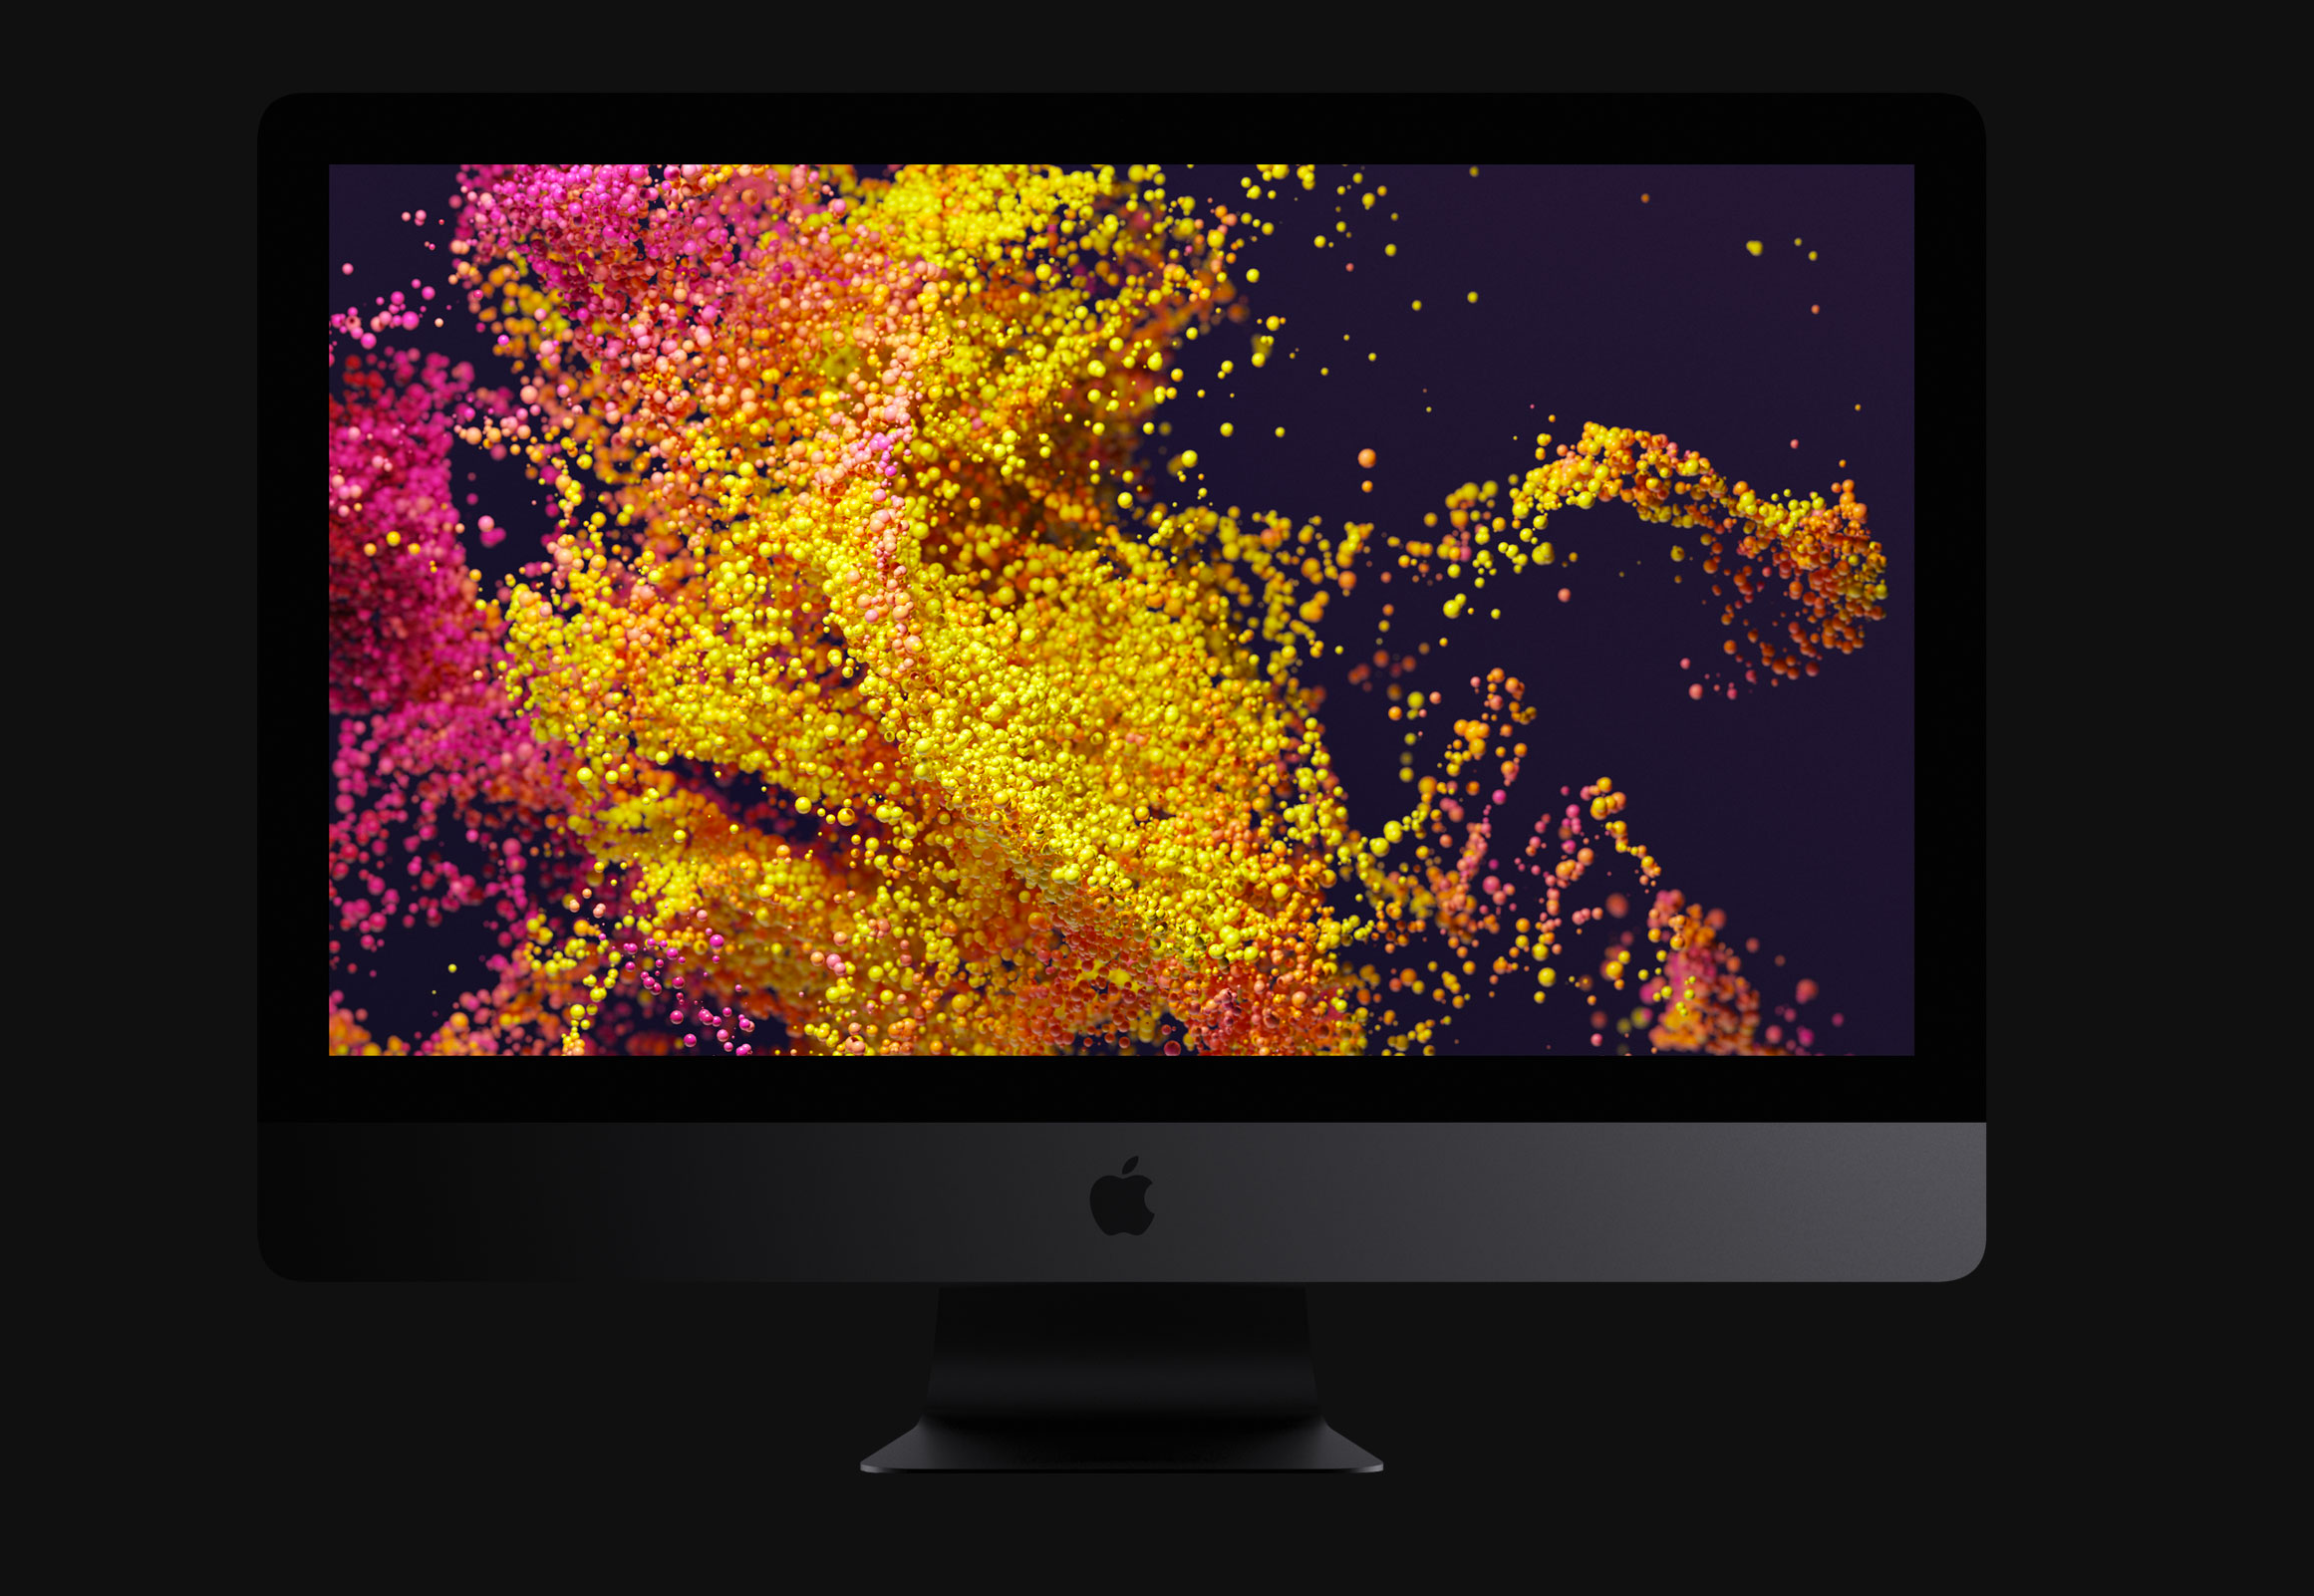 imac for photography editing 2017